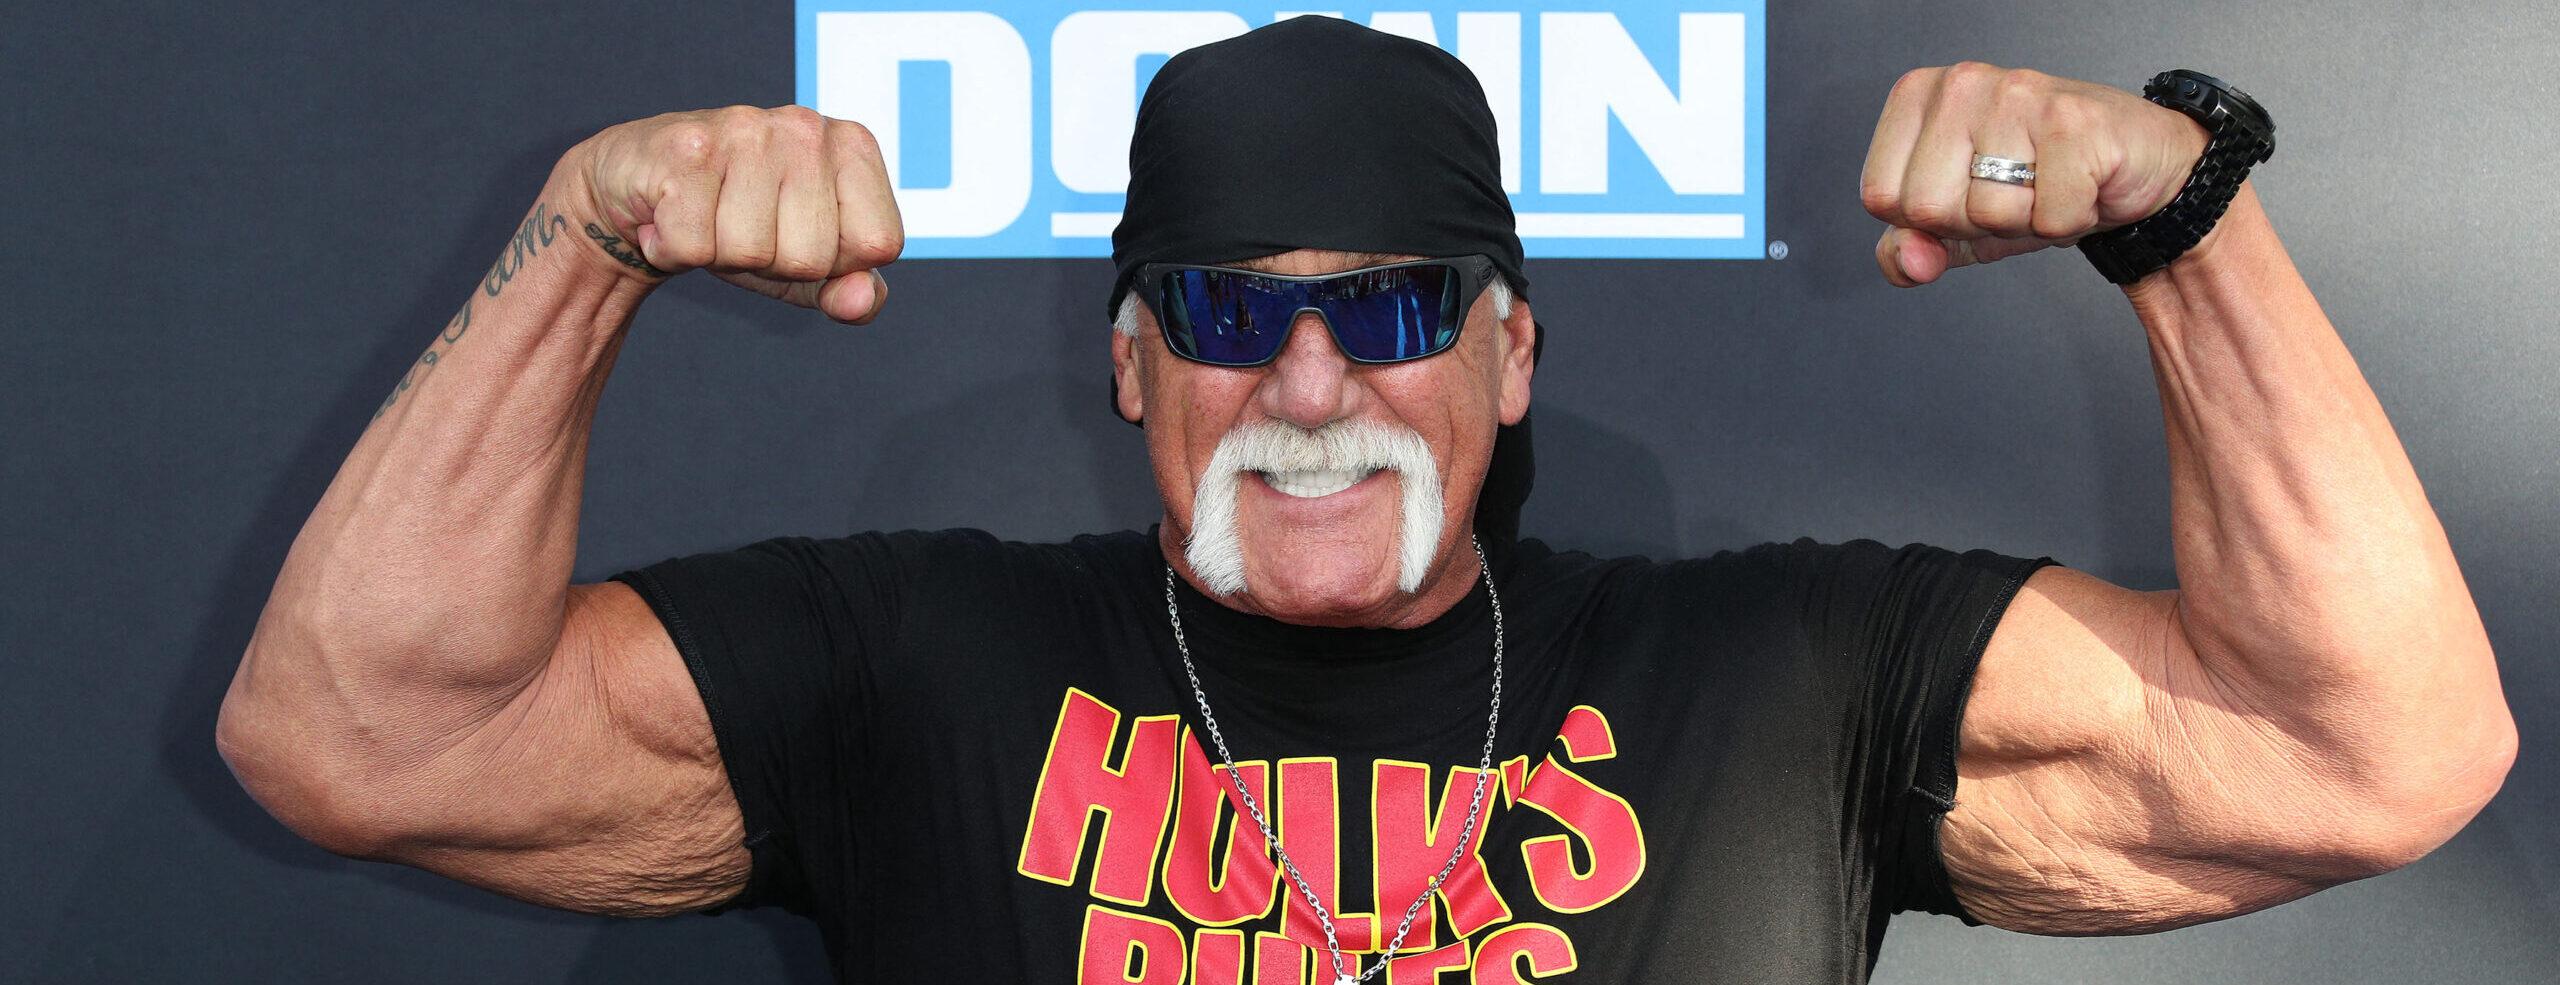 Hulk Hogan's Son Arrested For DUI After Refusing Sobriety Test